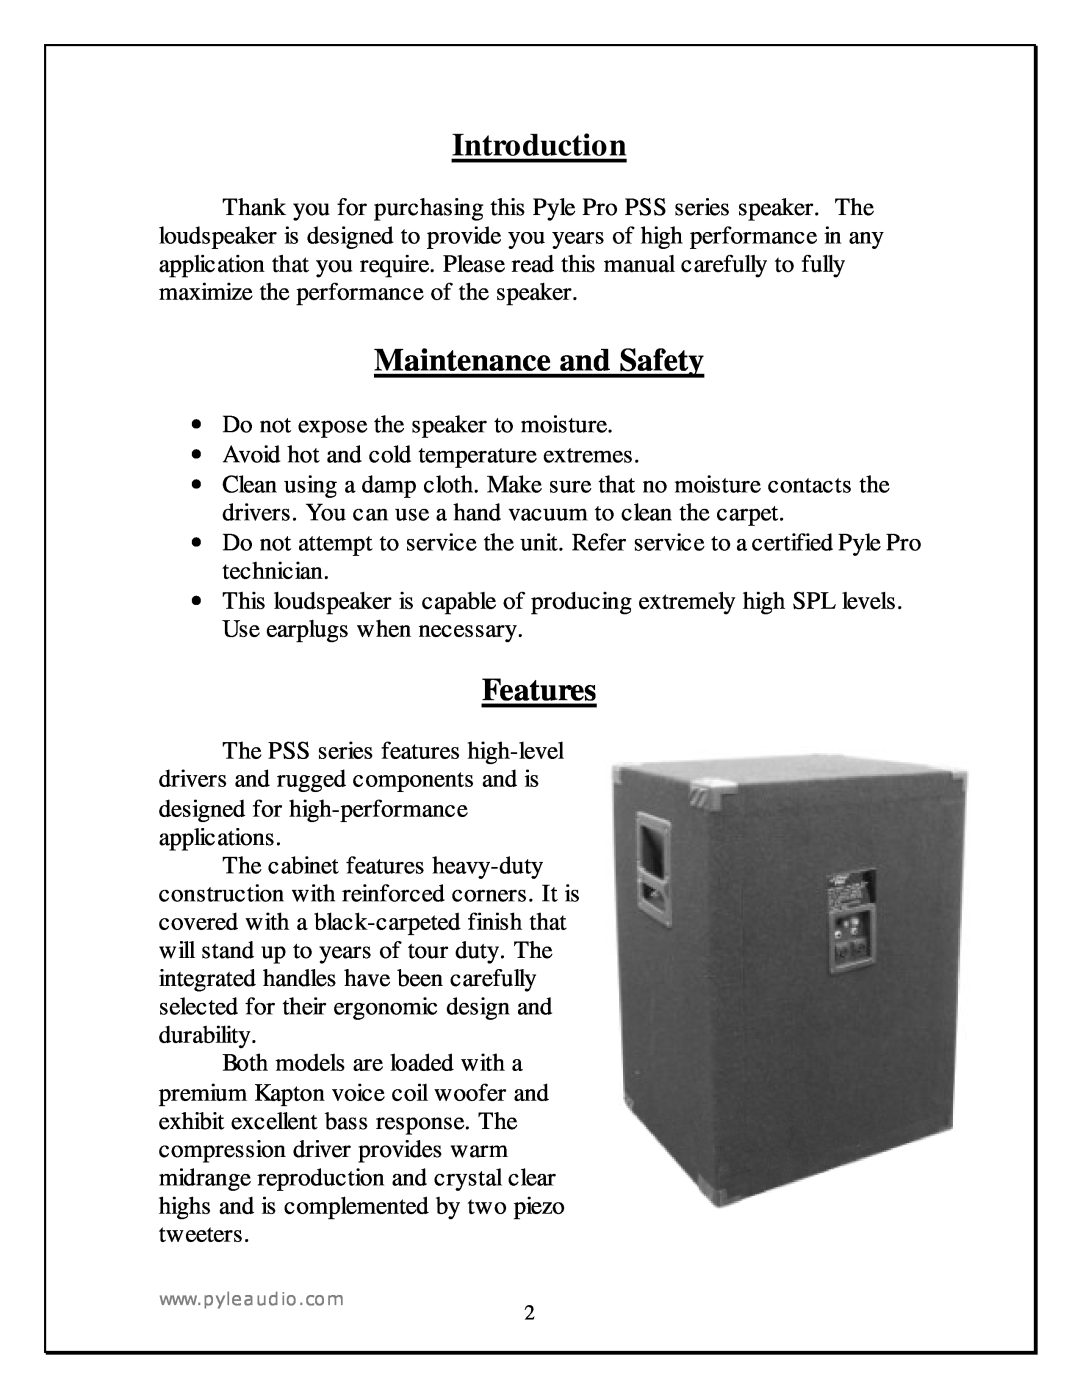 PYLE Audio PSS1822, PSS1522 manual Introduction, Maintenance and Safety, Features 